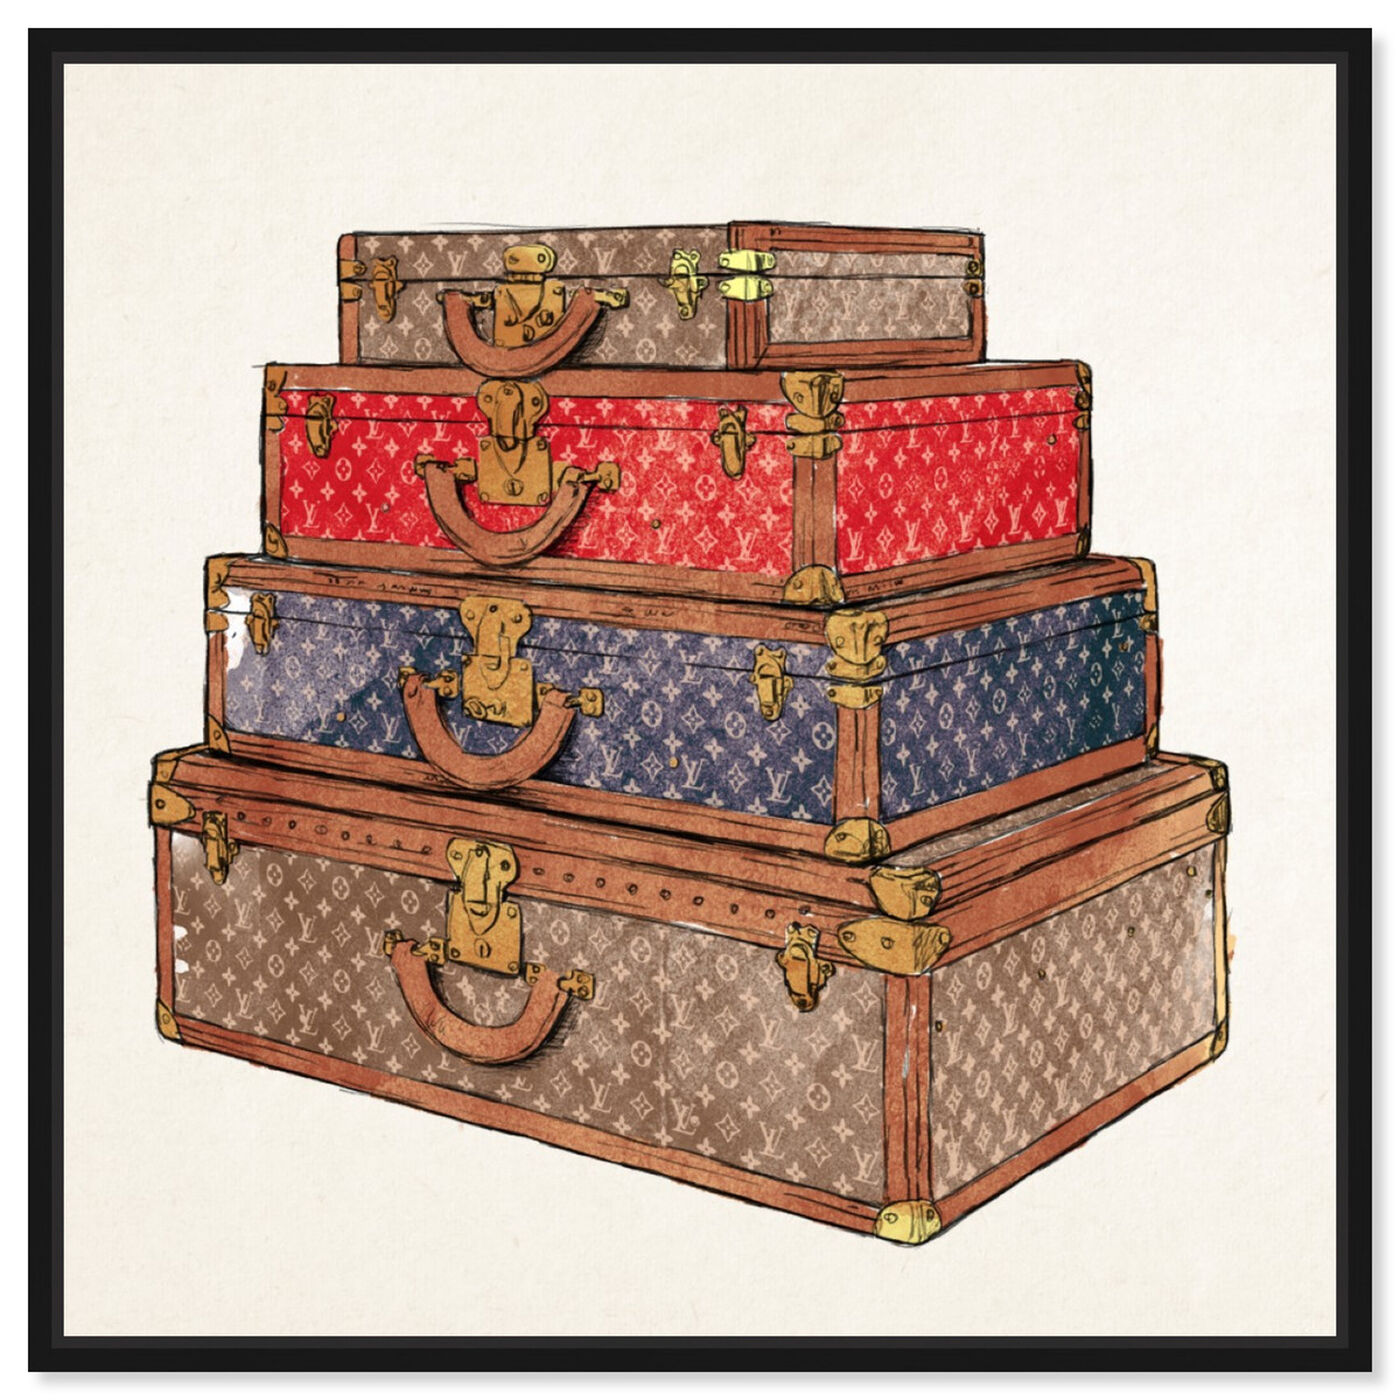 The Royal Luggage | Fashion and Glam Wall Art by Oliver Gal